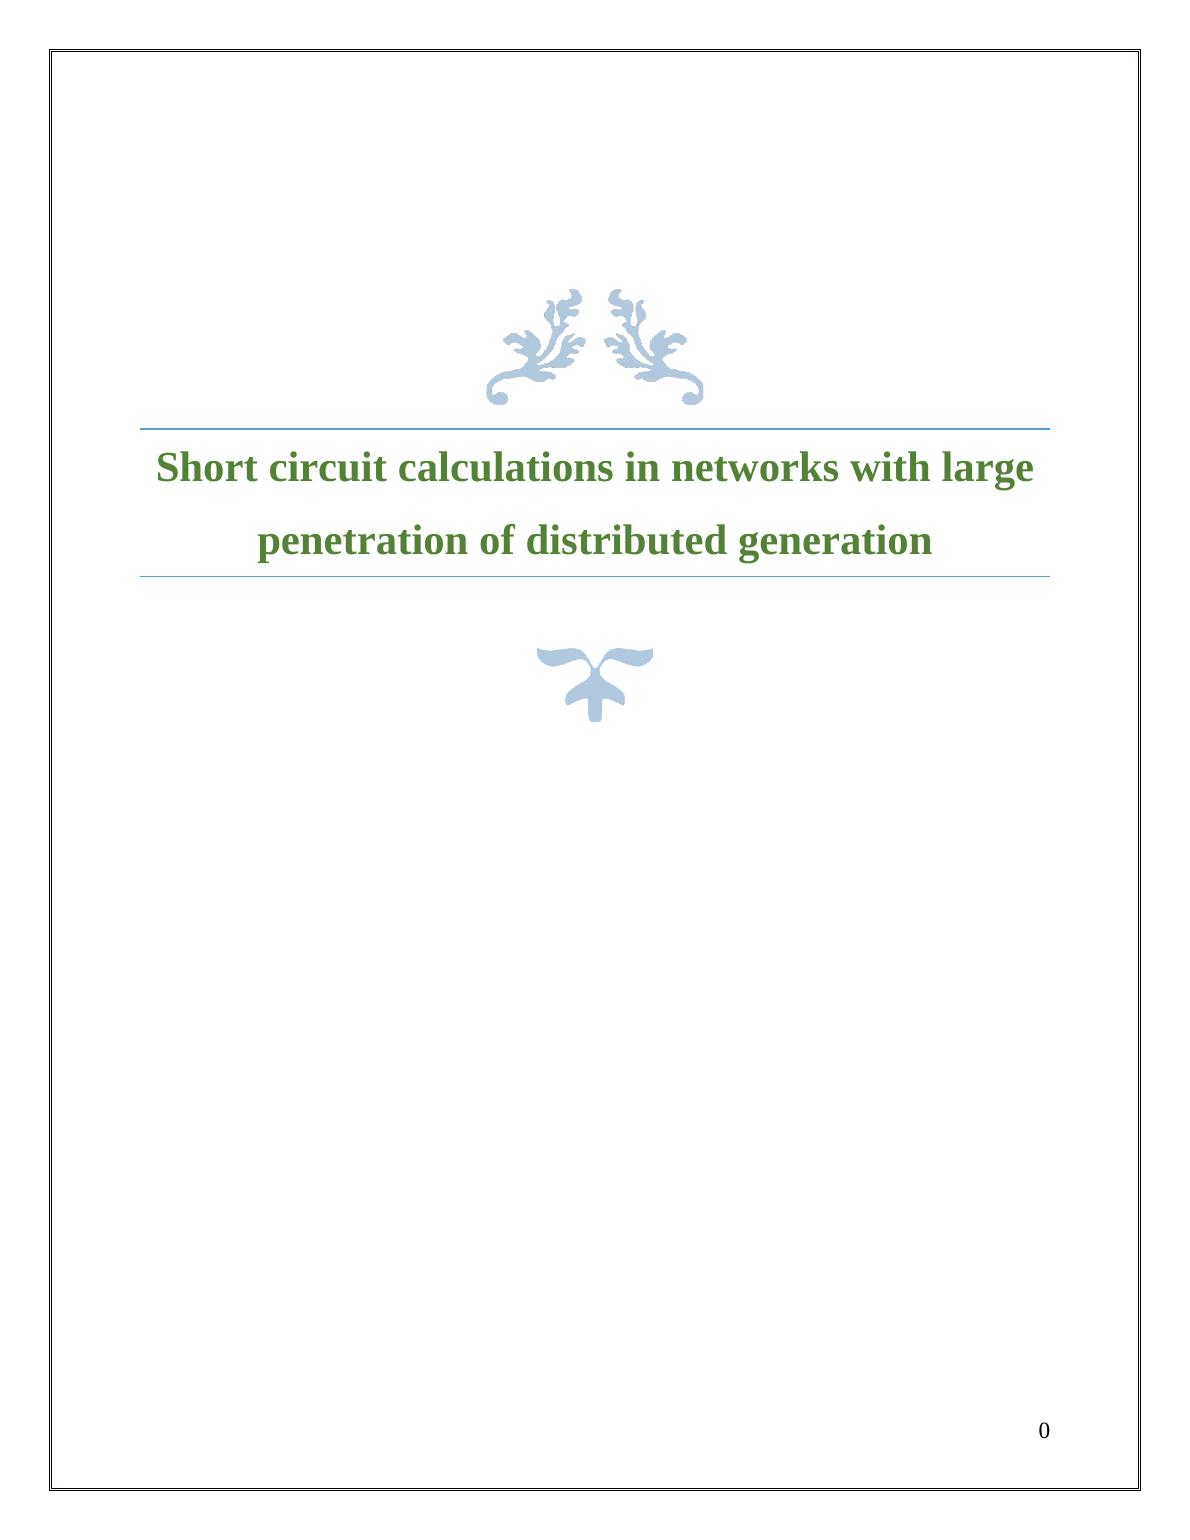 Report on Short Circuit Calculations in Networks_1